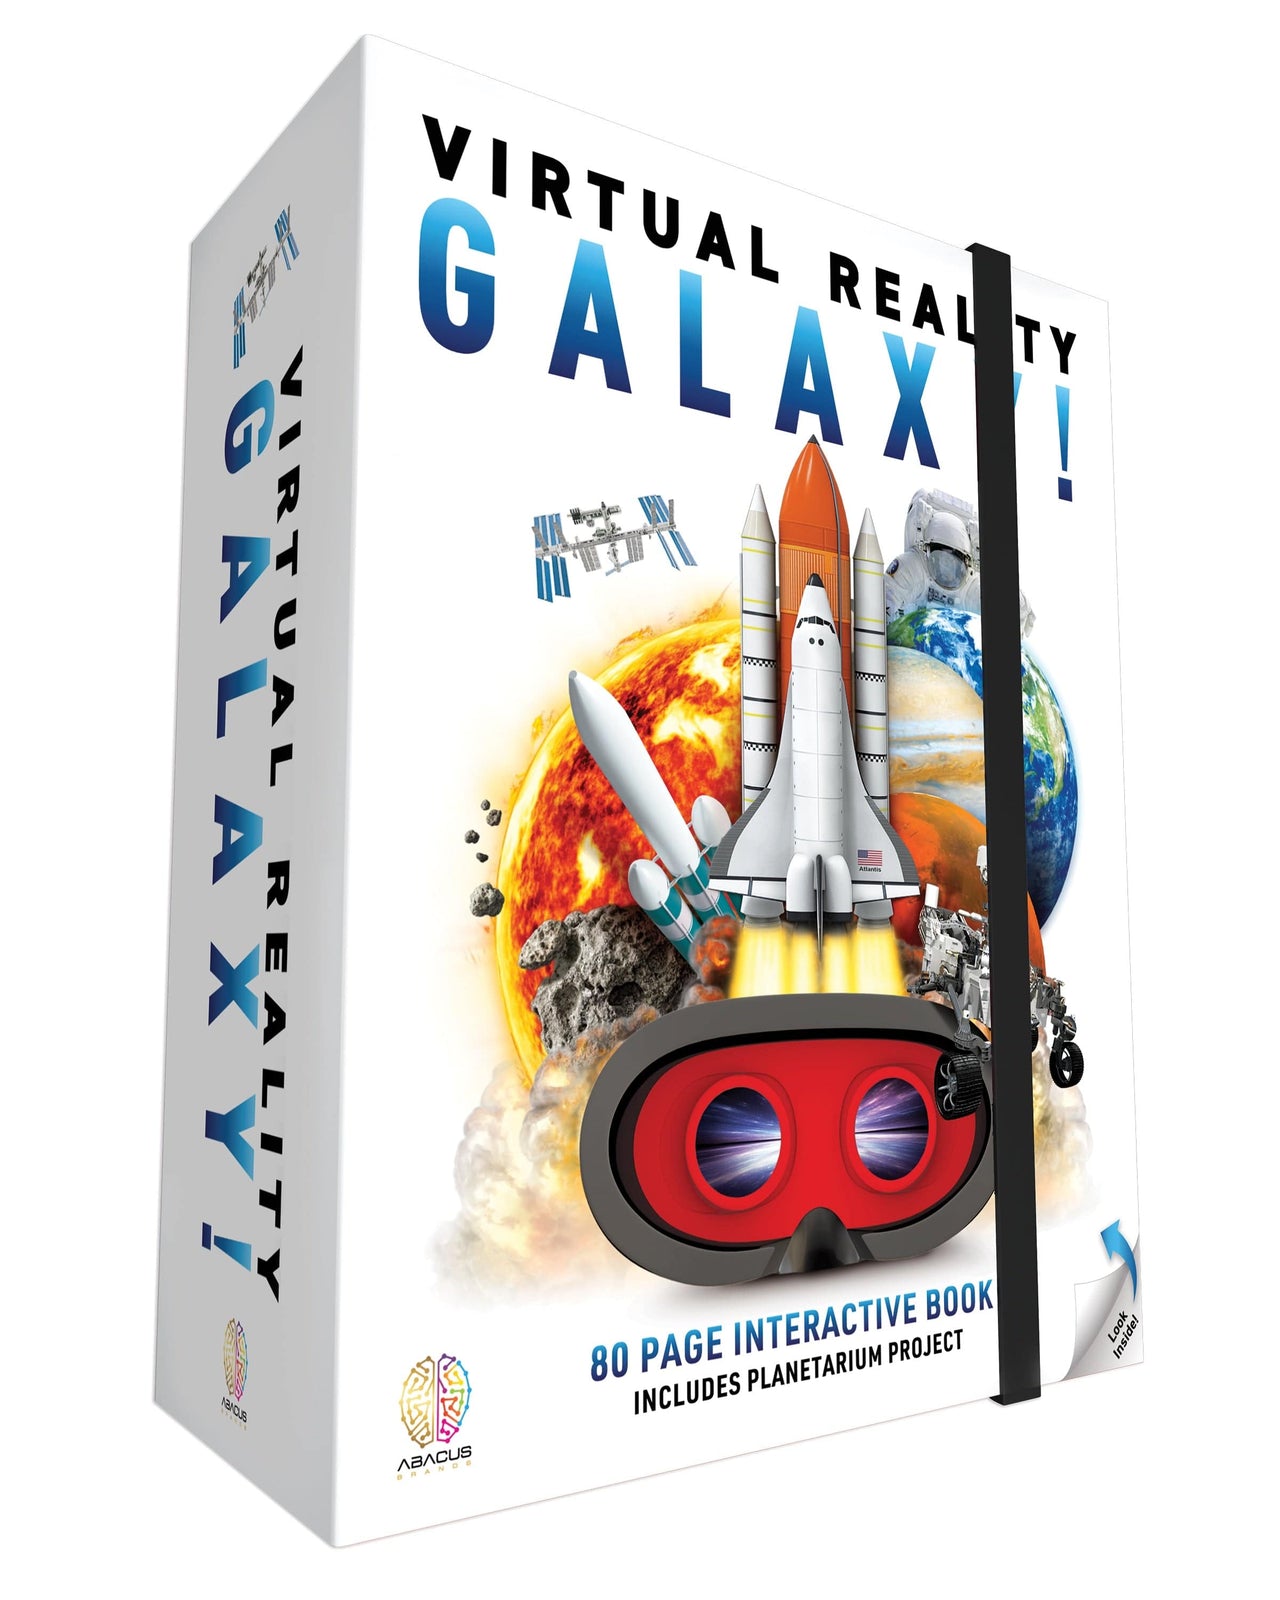 Abacus Brand stem Abacus Virtual Reality Galaxy Book and Gift Set